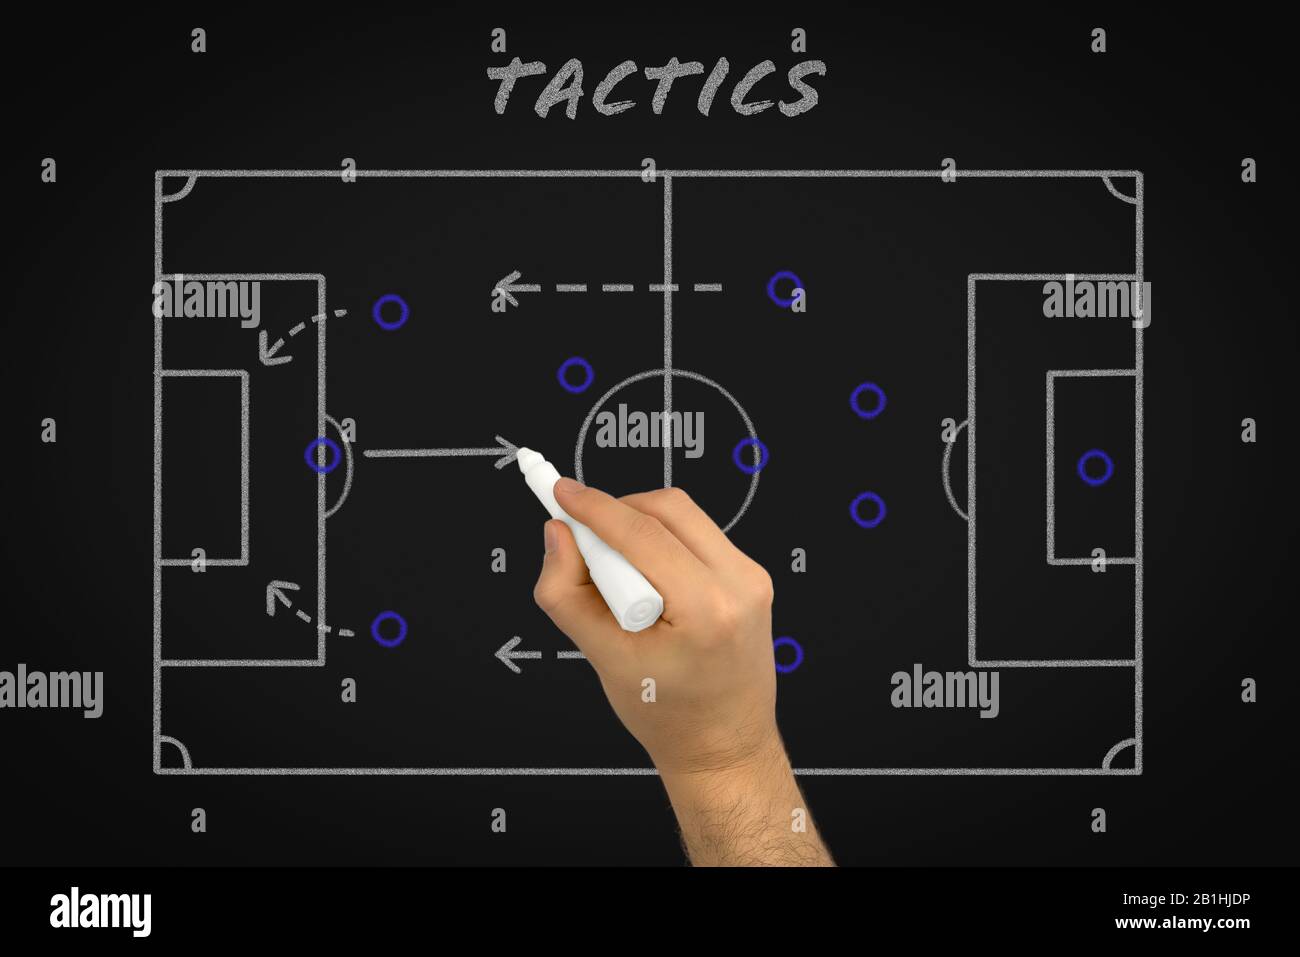 Football tactics coaching using chalk black board to explain team strategy - Soccer player, match formation tactical game plan of attack - Hand of teacher explaining players roles and responsibilities Stock Photo